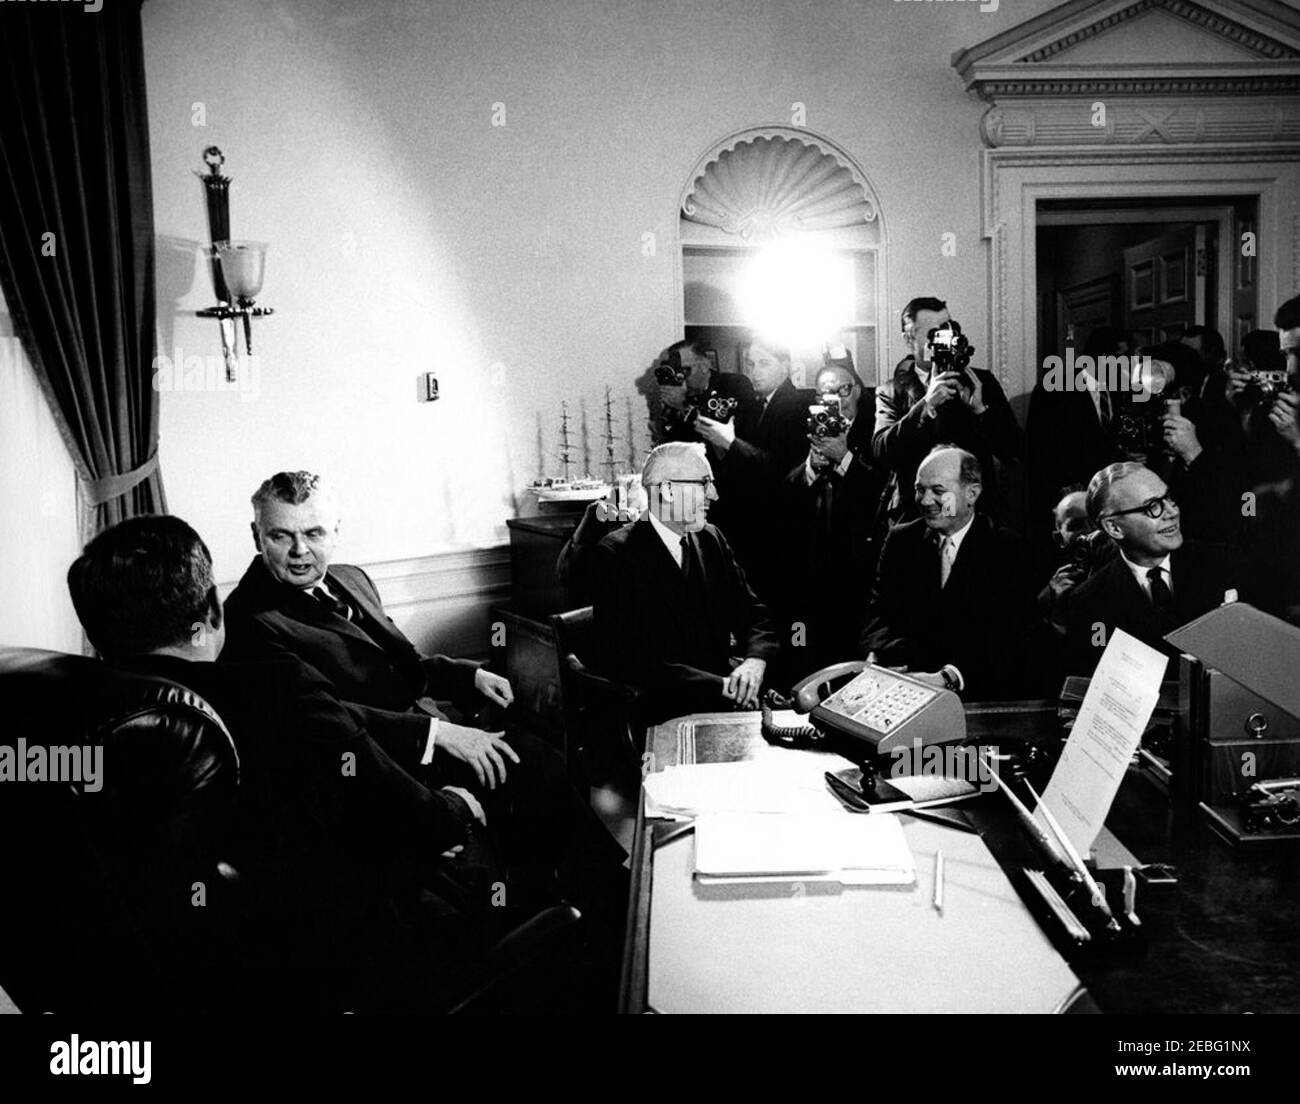 Meeting with John G. Diefenbaker, Prime Minister of Canada, 12:00PM. Photographers capture President John F. Kennedyu0027s meeting with Prime Minister John G. Diefenbaker of Canada in the Oval Office, White House, Washington, D.C. (L-R) President Kennedy; Prime Minister Diefenbaker; Secretary of State for External Affairs of Canada Howard C. Green; Secretary of State Dean Rusk; Canada Ambassador to the United States Arnold (A.D.P.) Heeney. Stock Photo